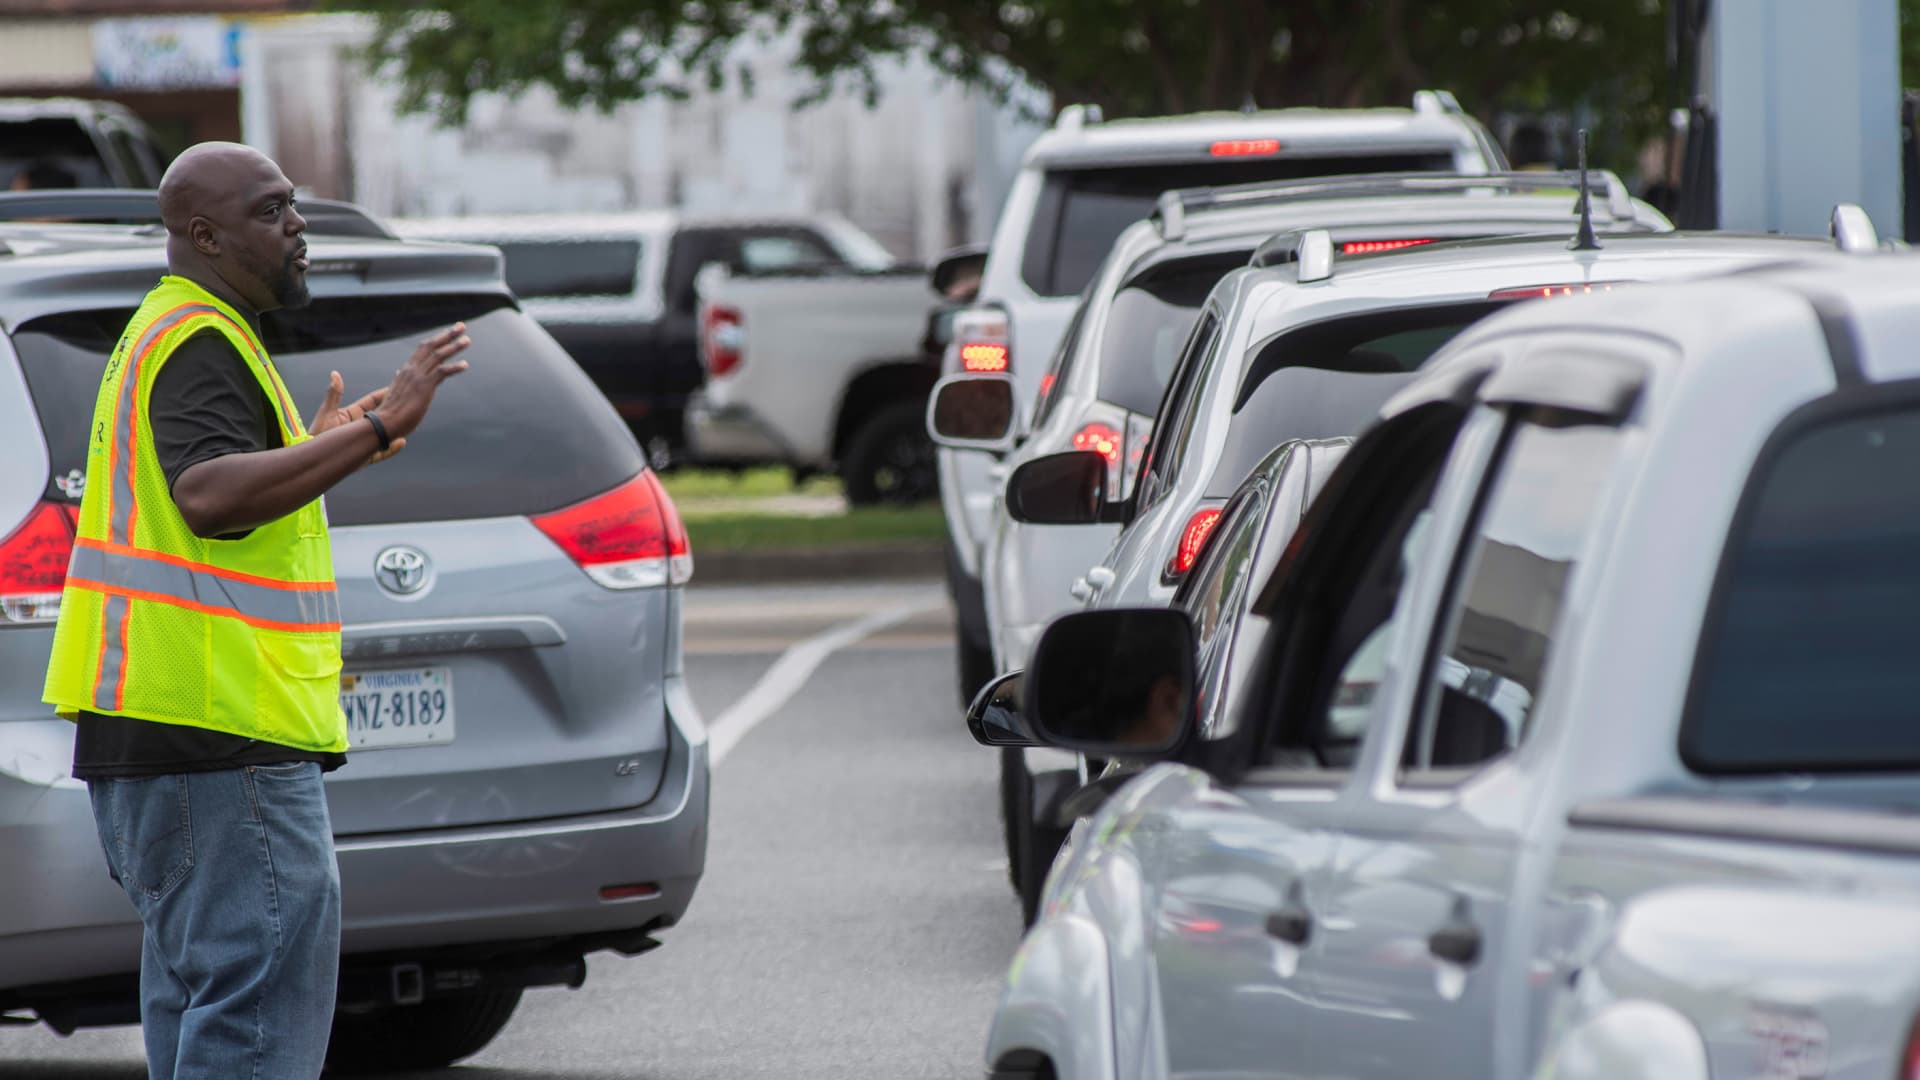 A line of vehicles proceeds towards gas pumps at Costco, as Eric Howard directs traffic after a cyberattack crippled the biggest fuel pipeline in the country, run by Colonial Pipeline, in Norfolk, Virginia, May 11, 2021.